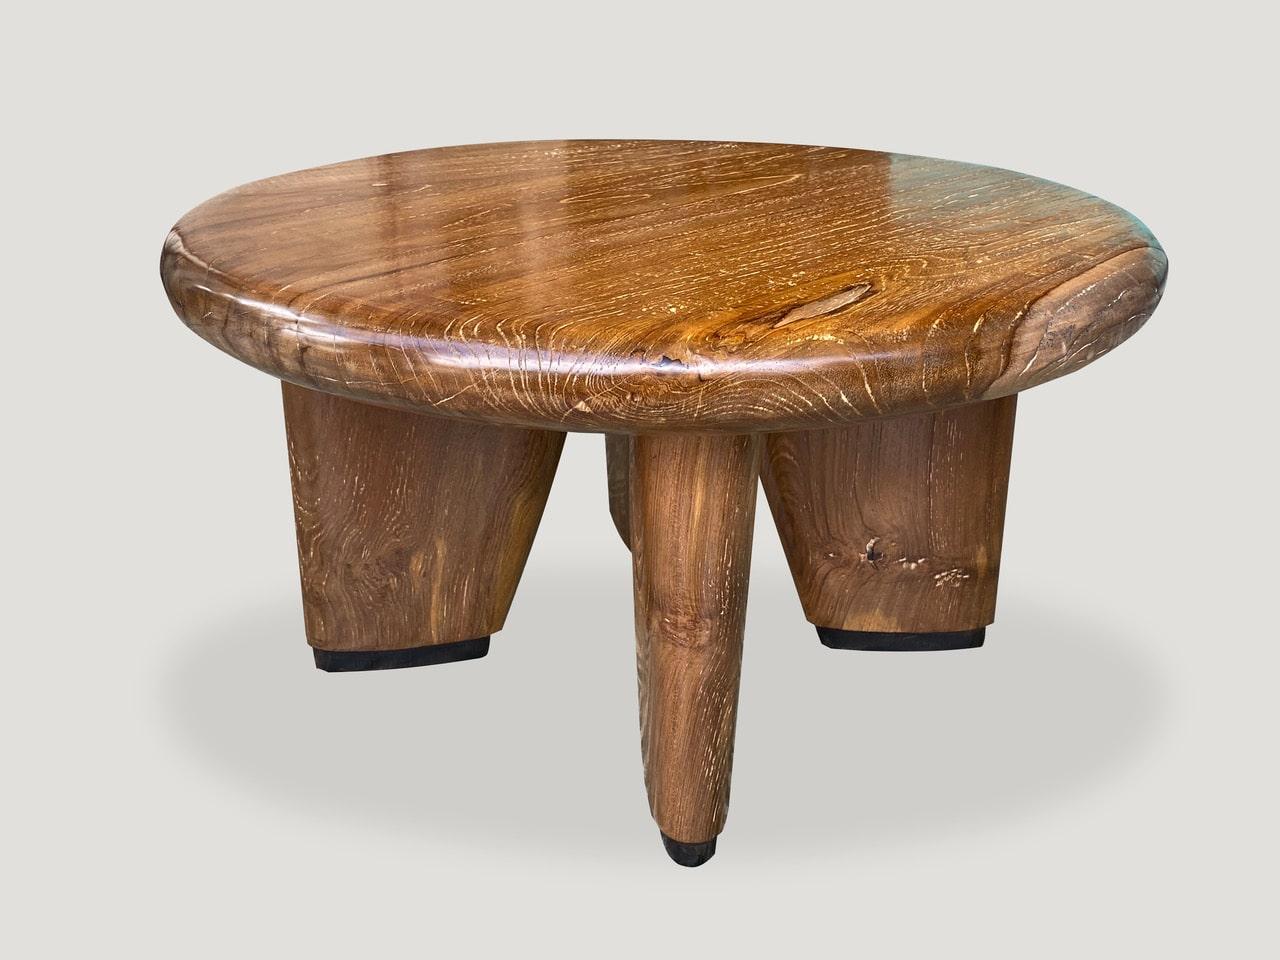 Contemporary Andrianna Shamaris Midcentury Couture Teak Wood Low Profile Round Coffee Table For Sale